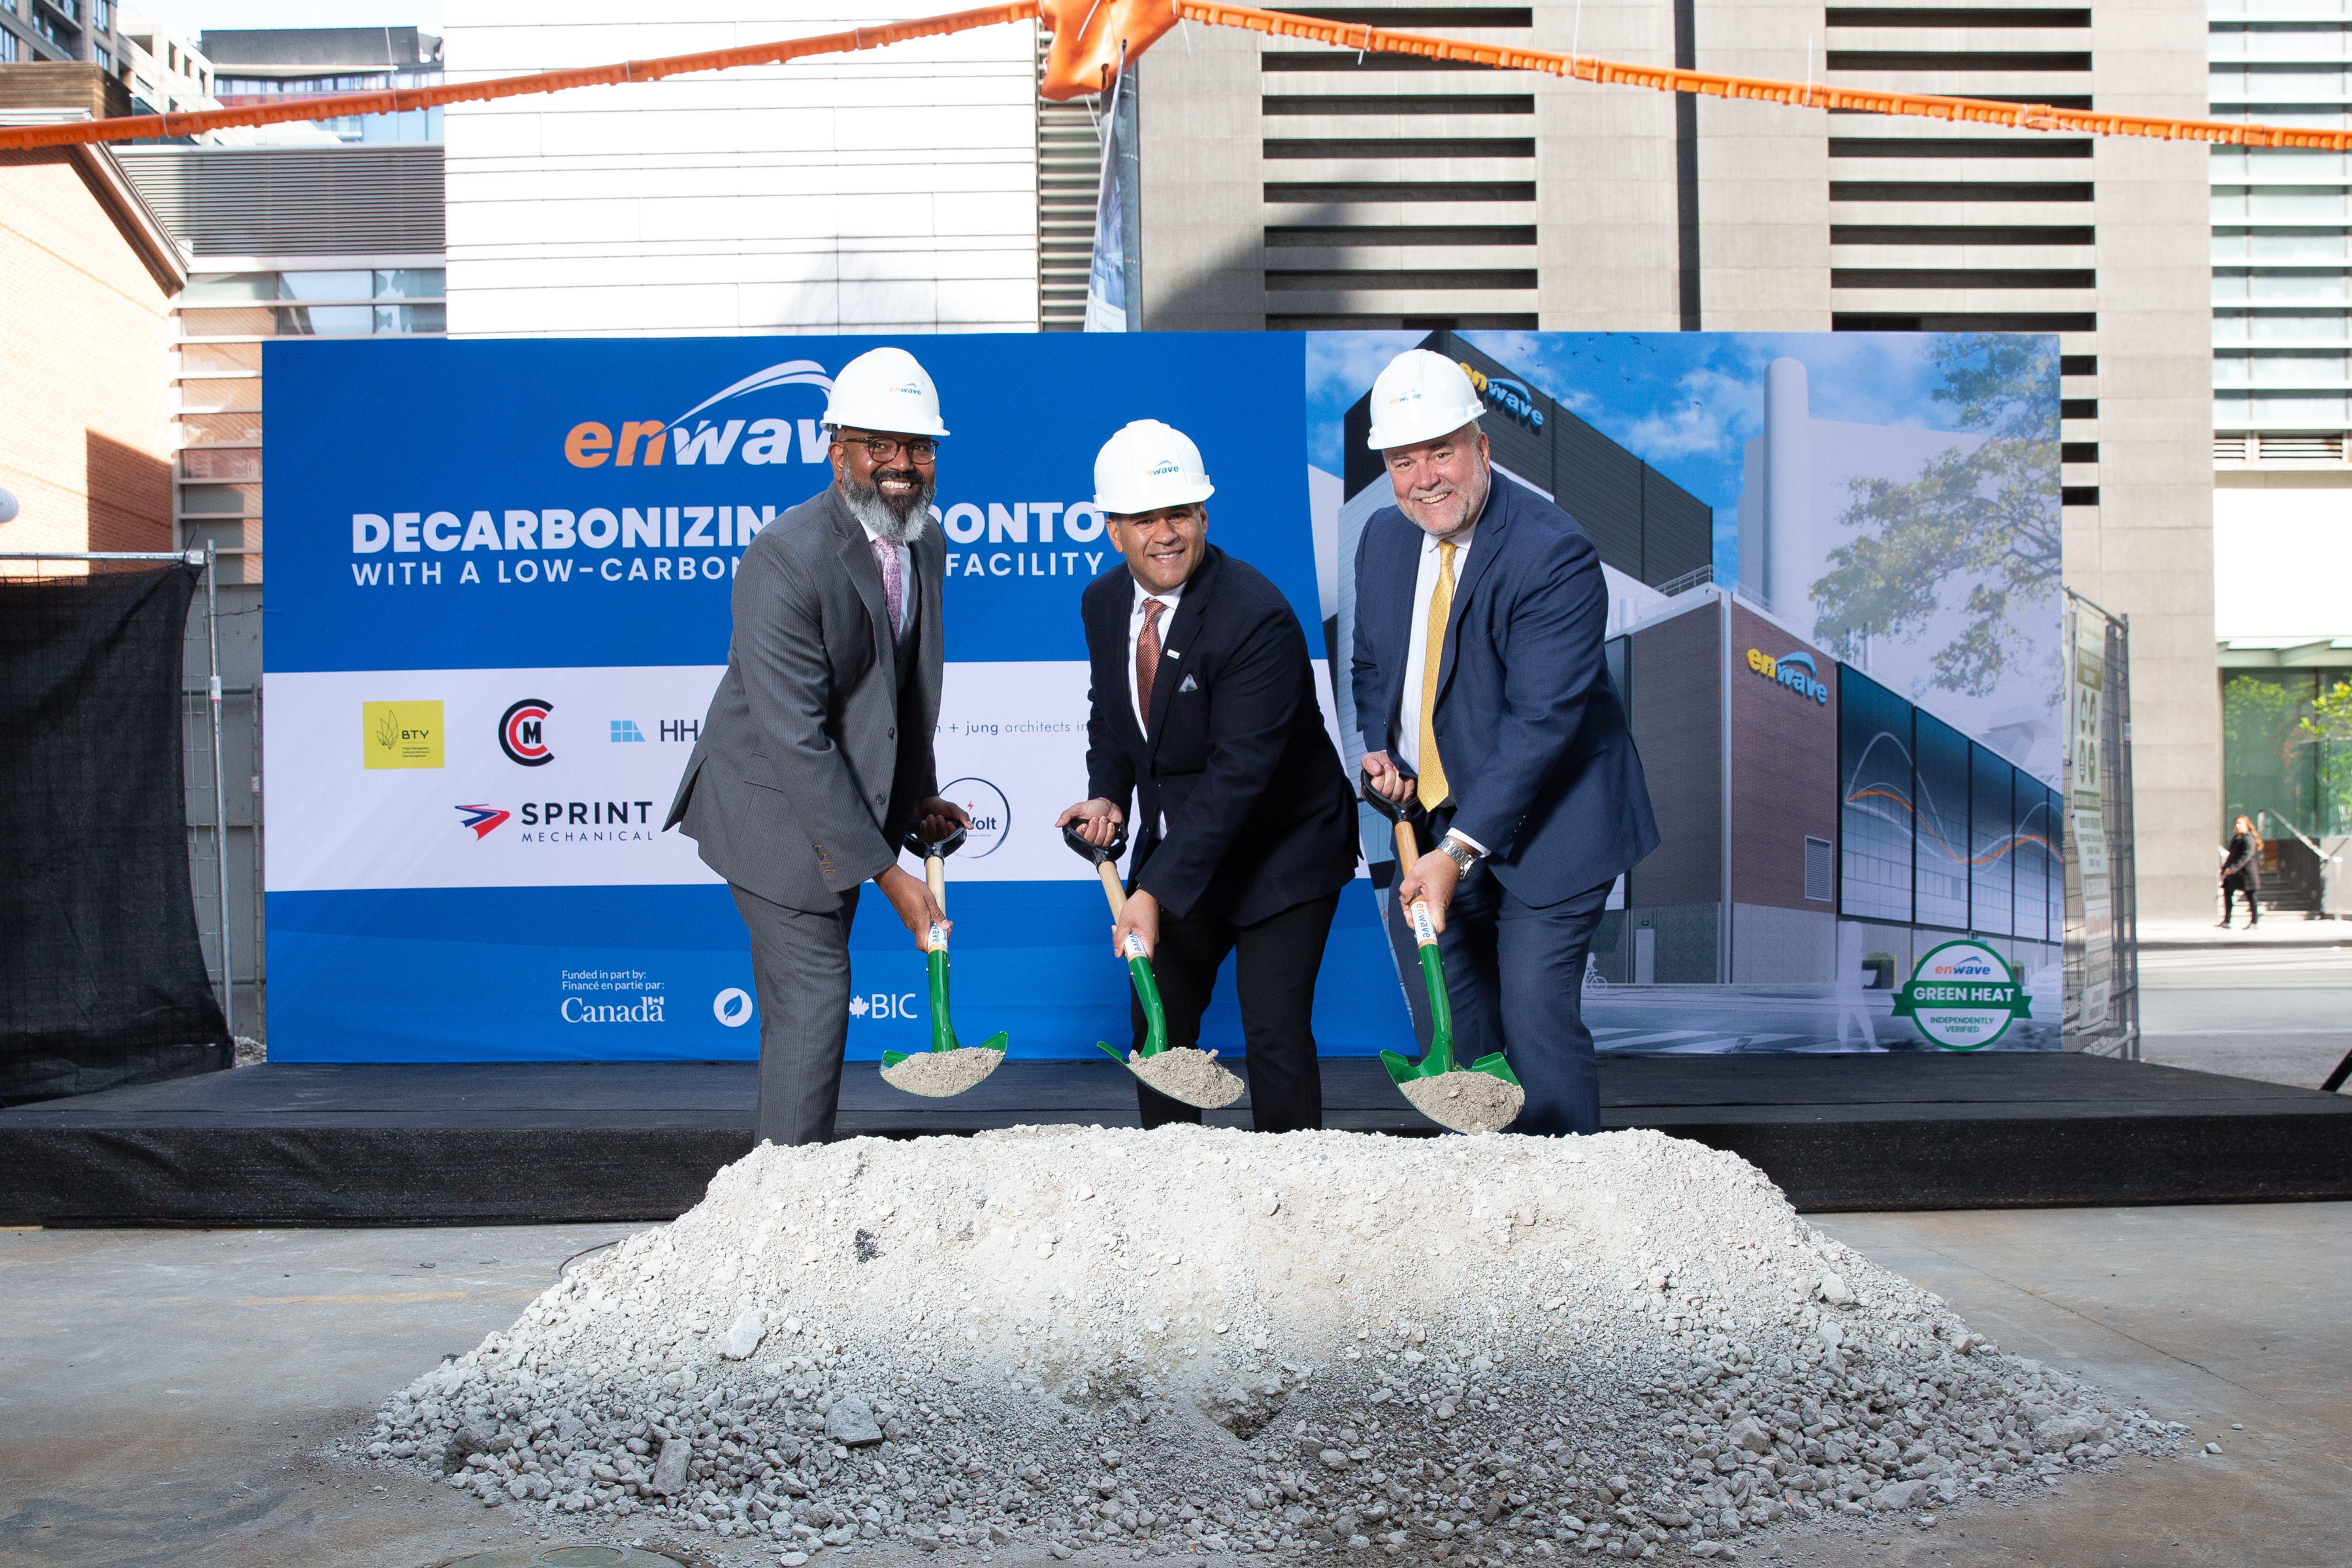 Enwave breaks ground on a new low-carbon heating facility to supply ‘Green Heat’ to Toronto